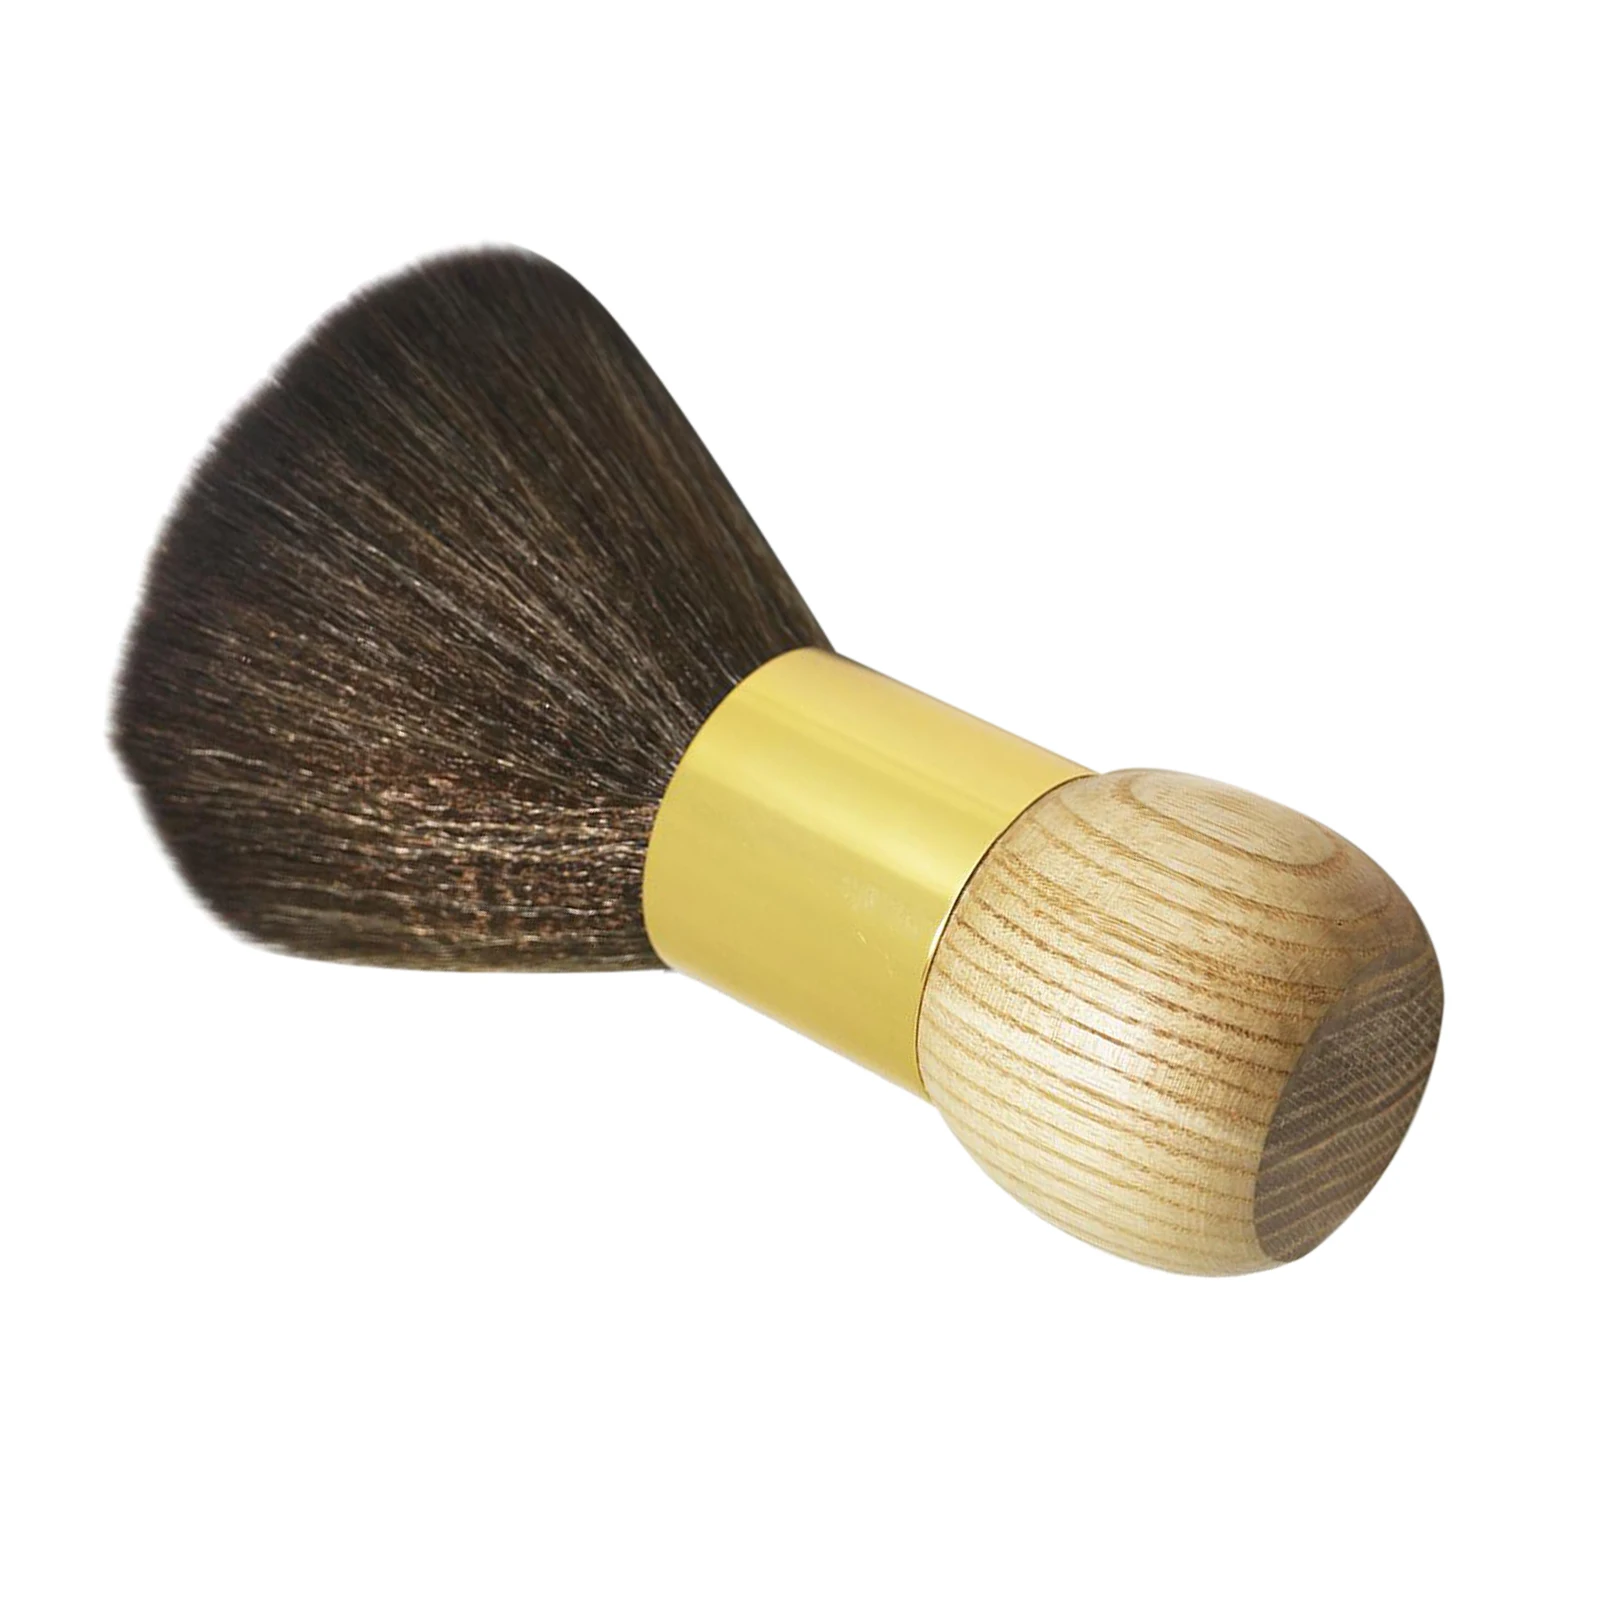 Home Use Wooden Neck Duster Brush Hairbrush Haircut for Barber Hairdressing Styling Tool Cleaning Remove Hair Clippings